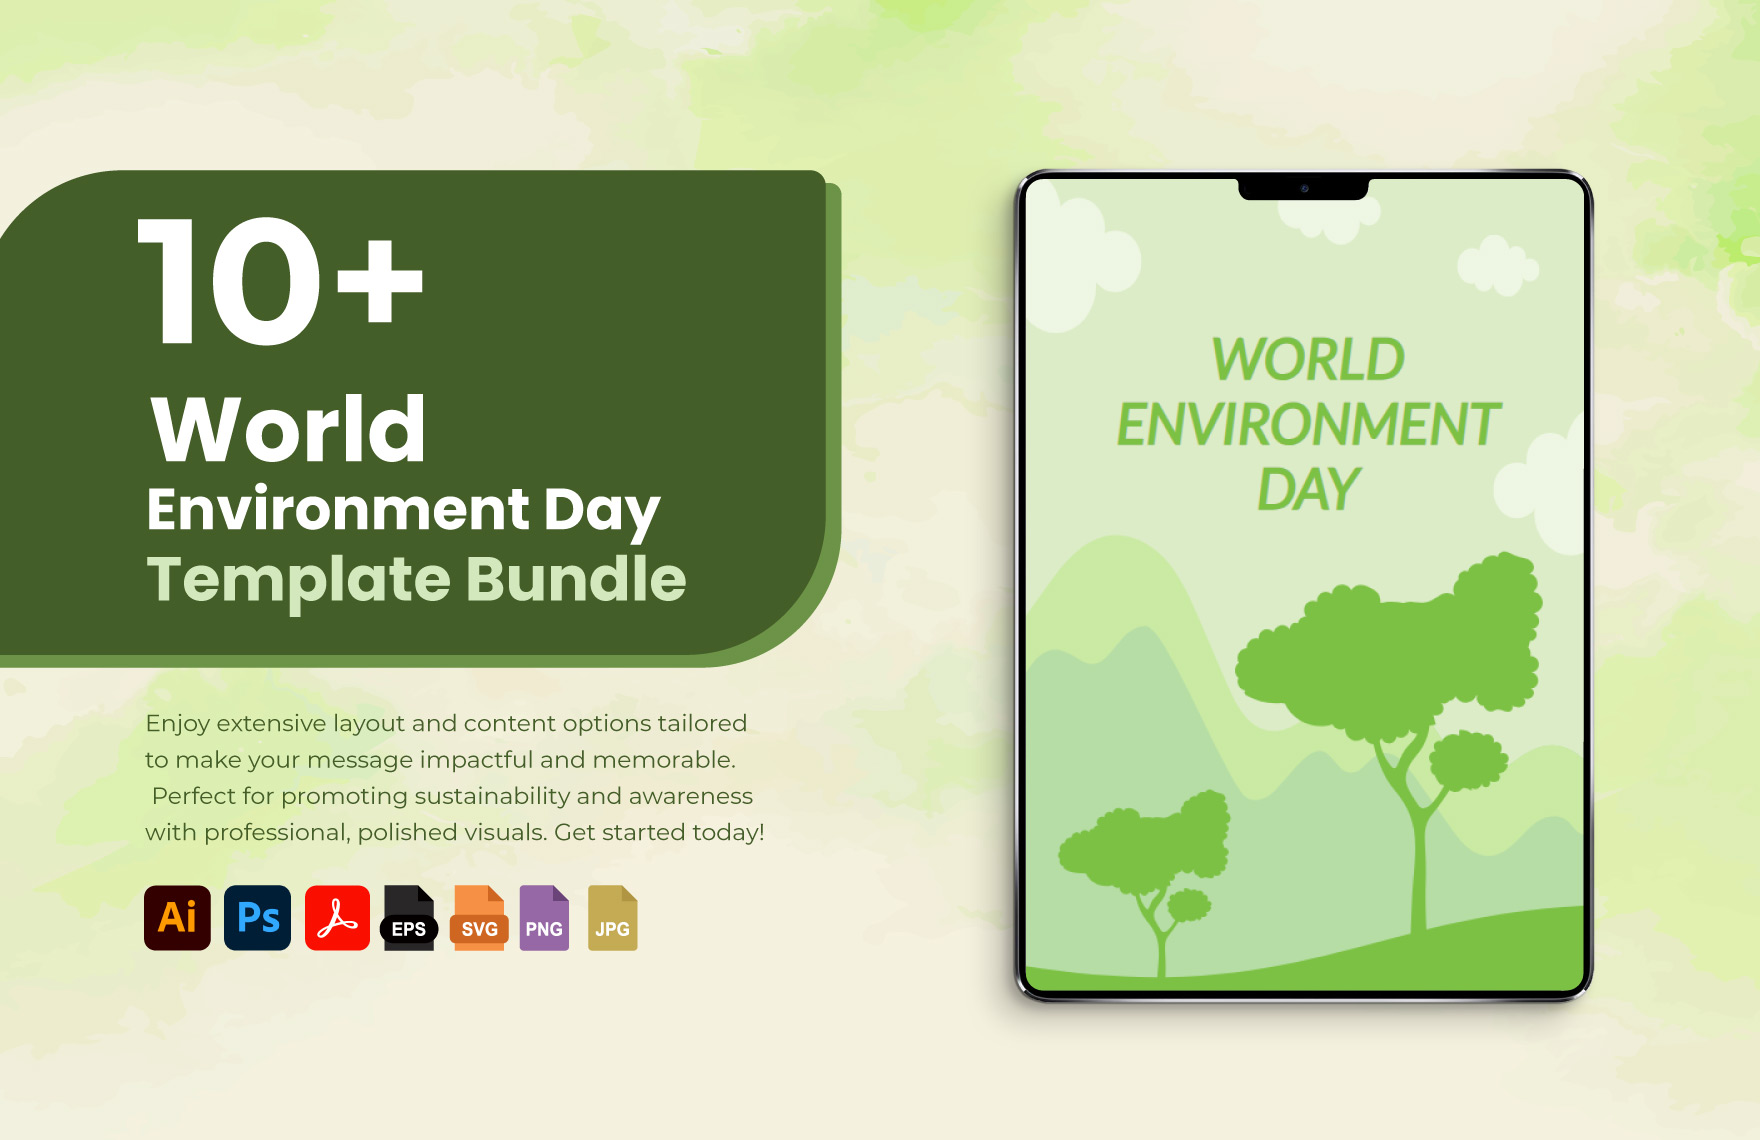 Free 10+ World Environtment Day Template Bundle in PDF, Illustrator, PSD, EPS, SVG, JPG, PNG